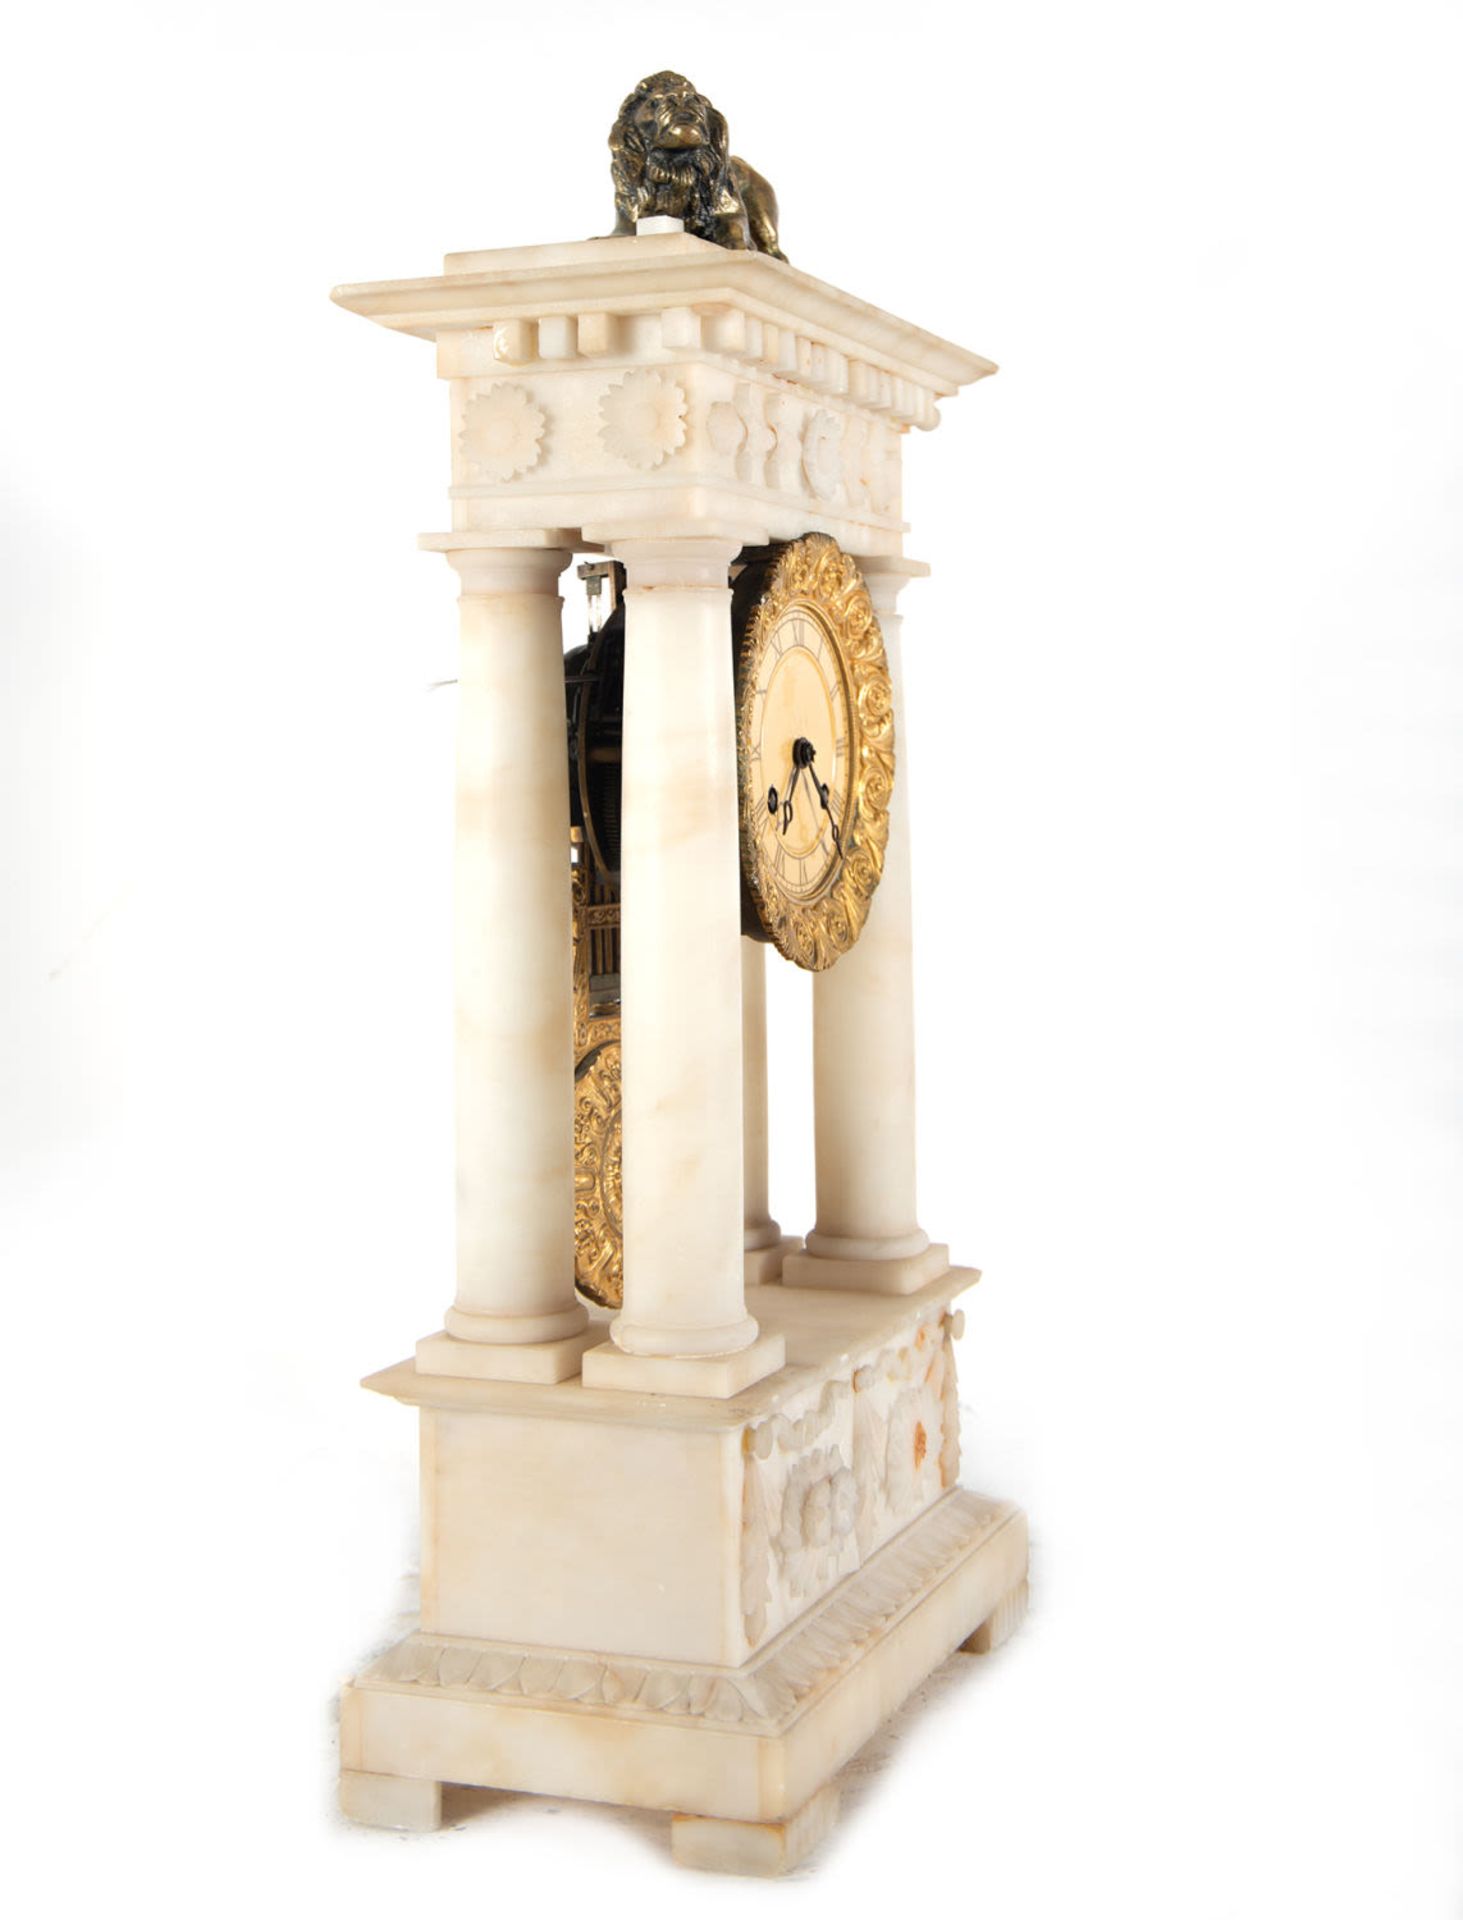 Empire style porch clock in gilt bronze and marble. XIX century - Image 4 of 5